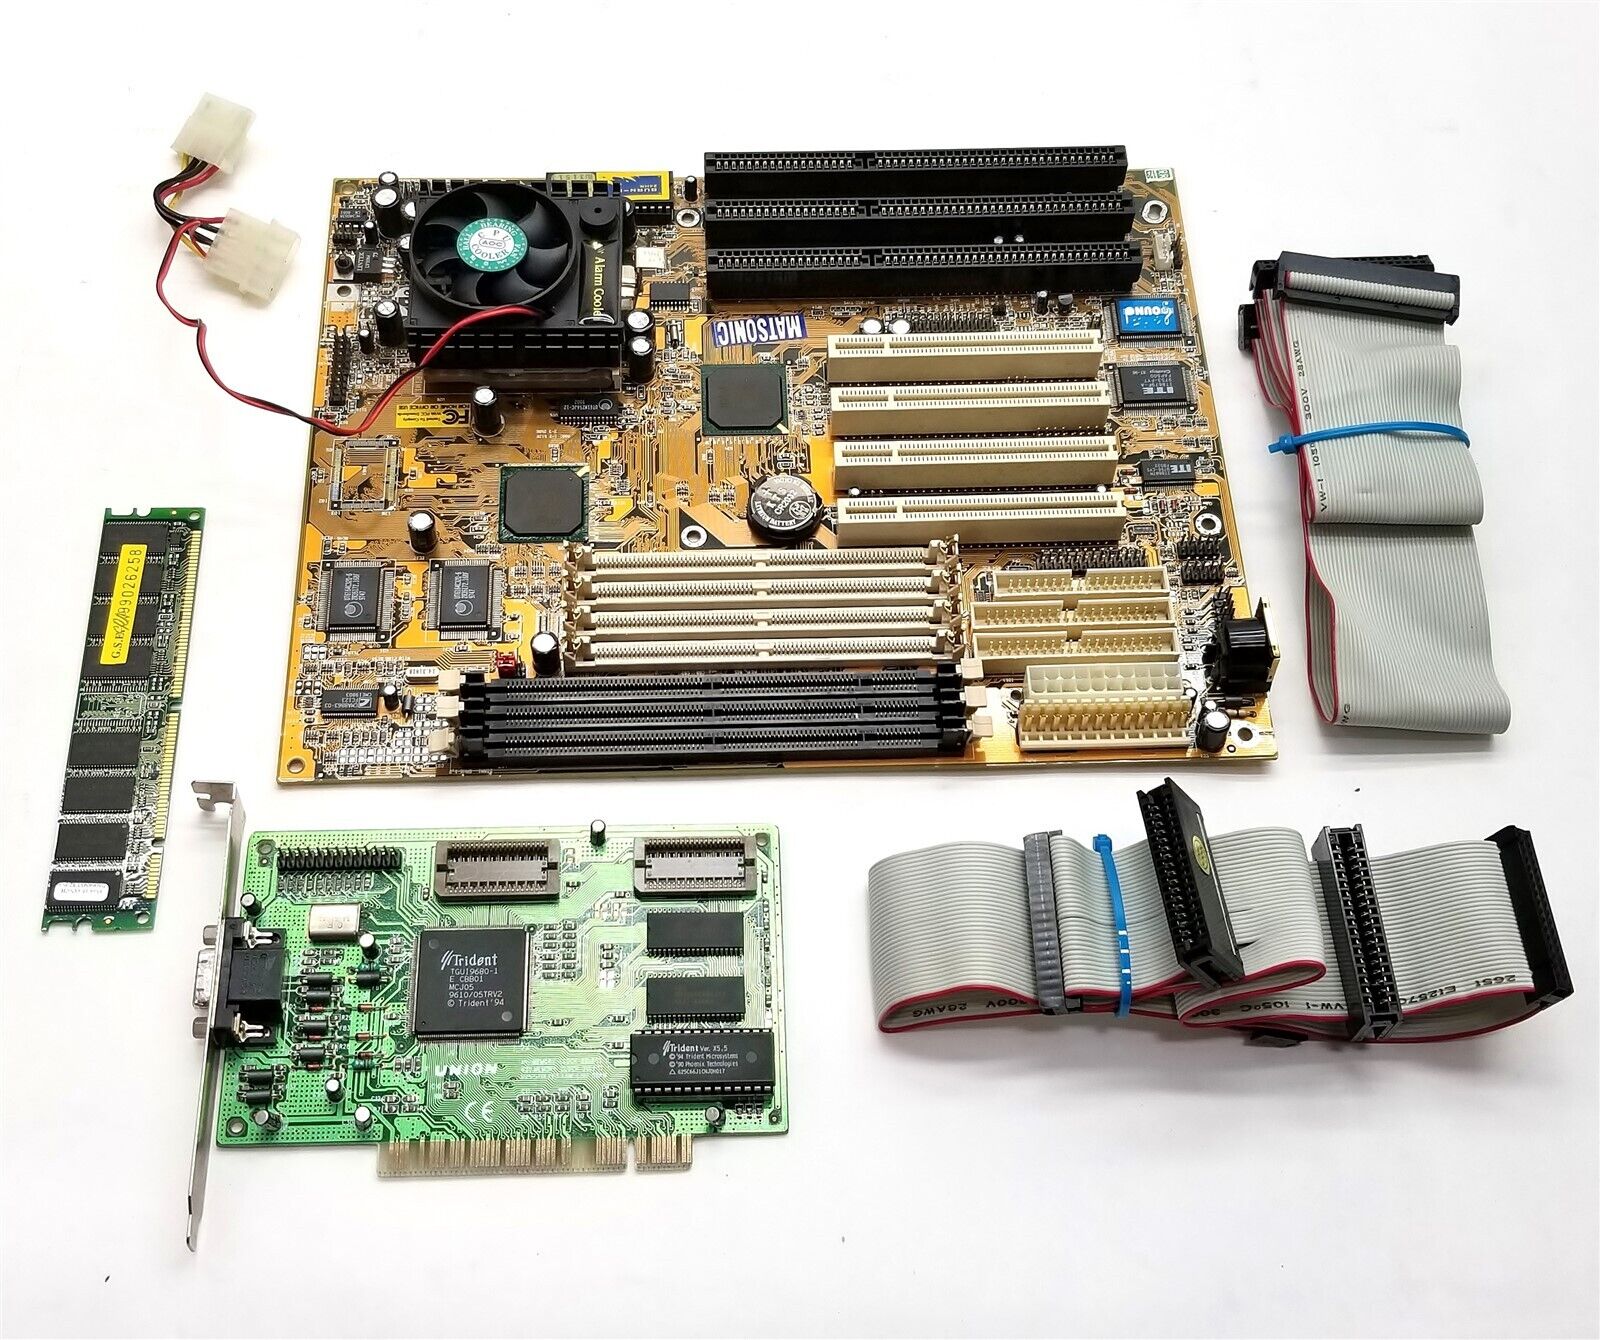 Matsonic MS-5025S Motherboard Sock7 Baby AT Pent MMX-P55C 166MHz 32MB TGUI9680-1